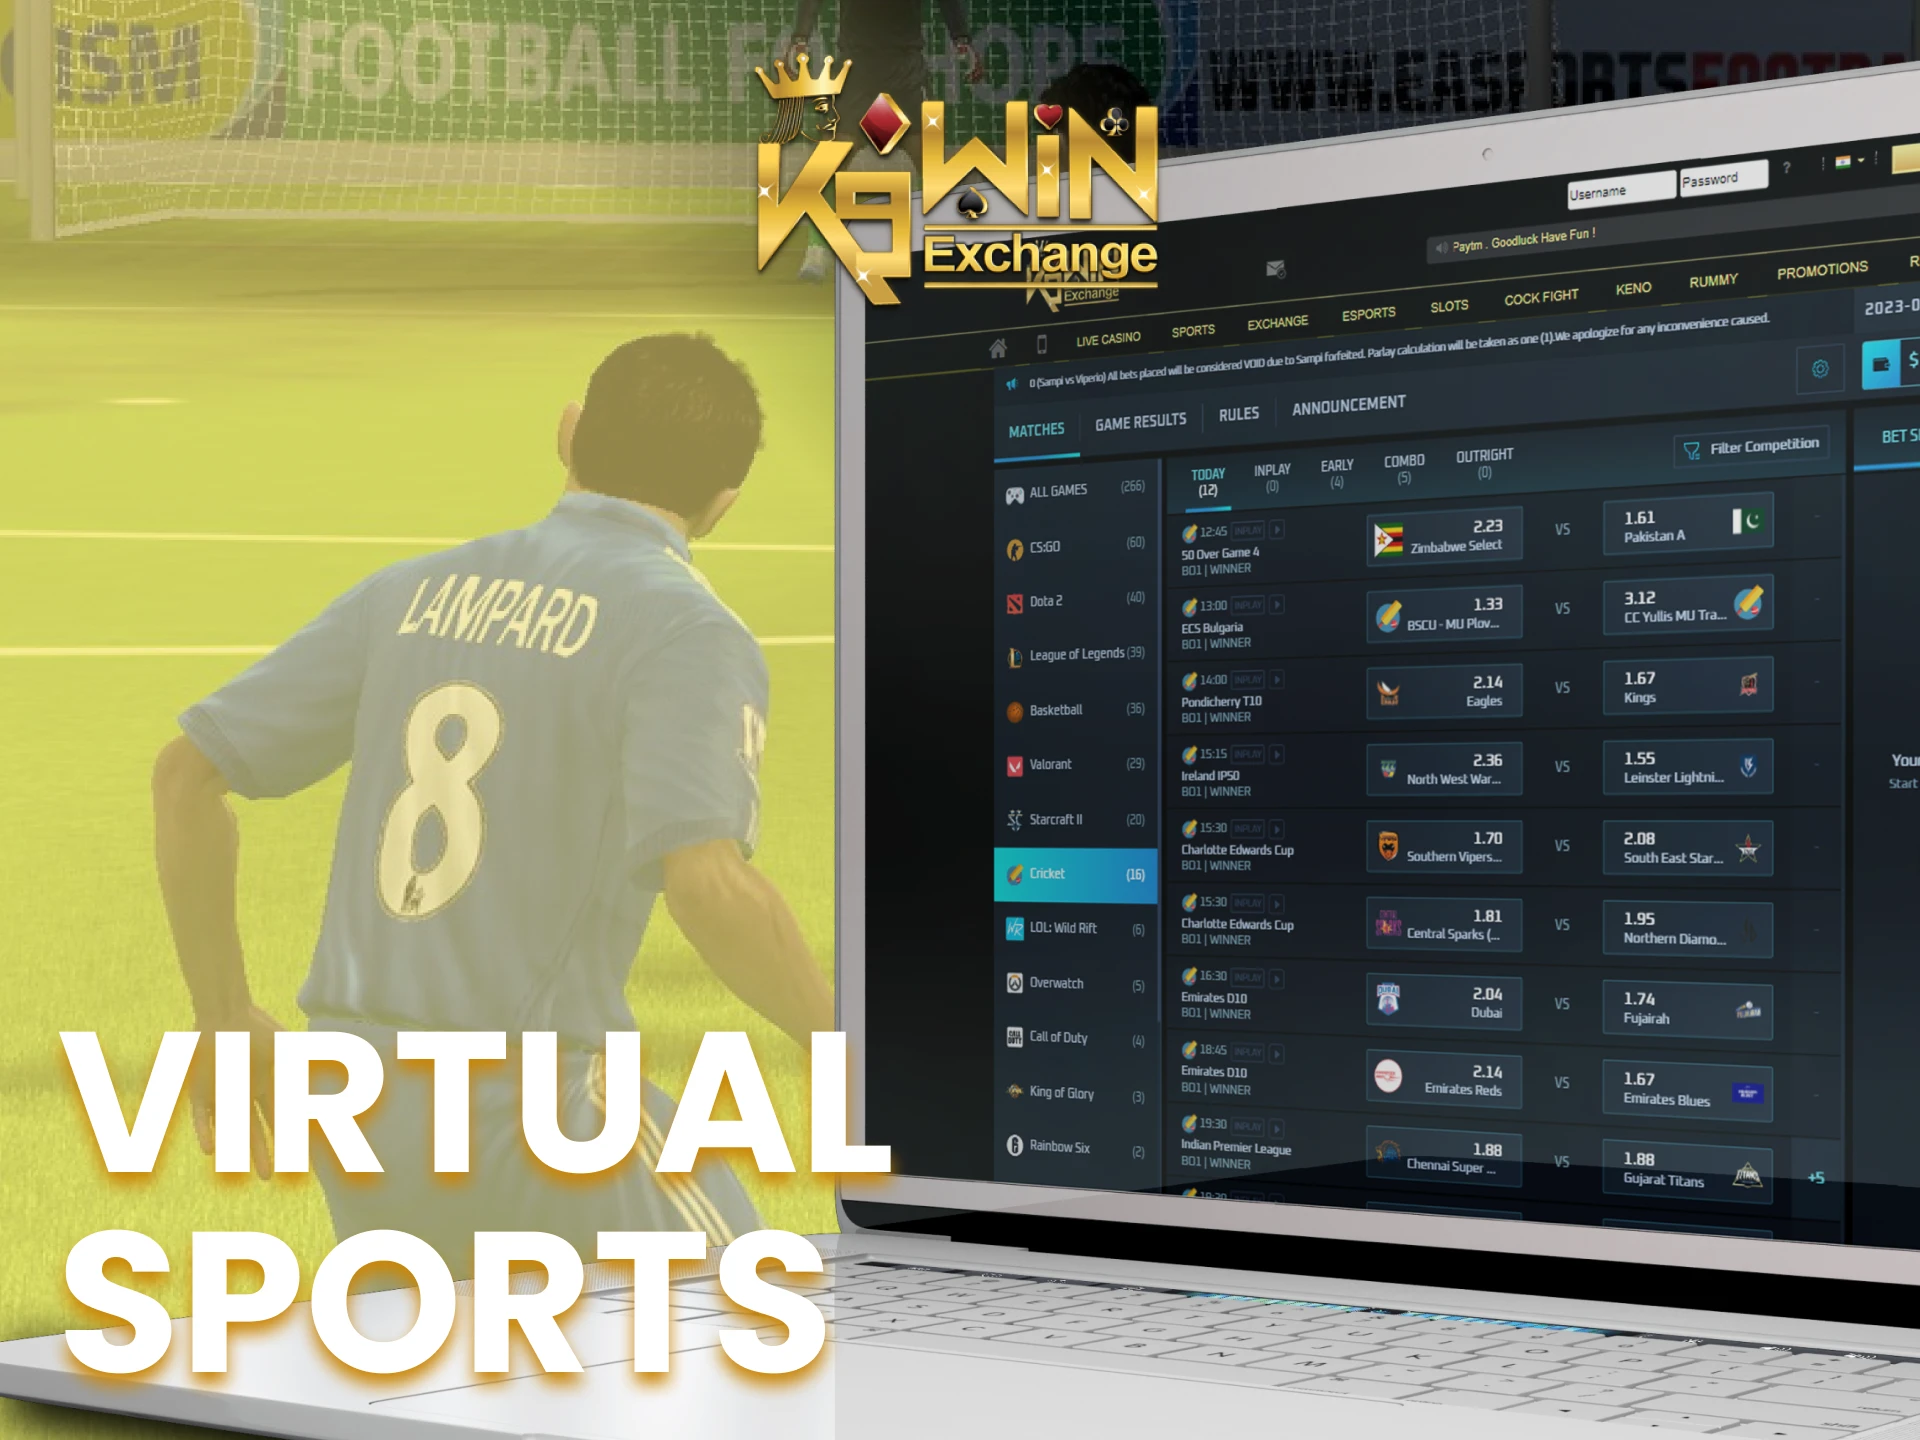 Bet on the new exotic virtual sports on the K9Win virtual sports page.